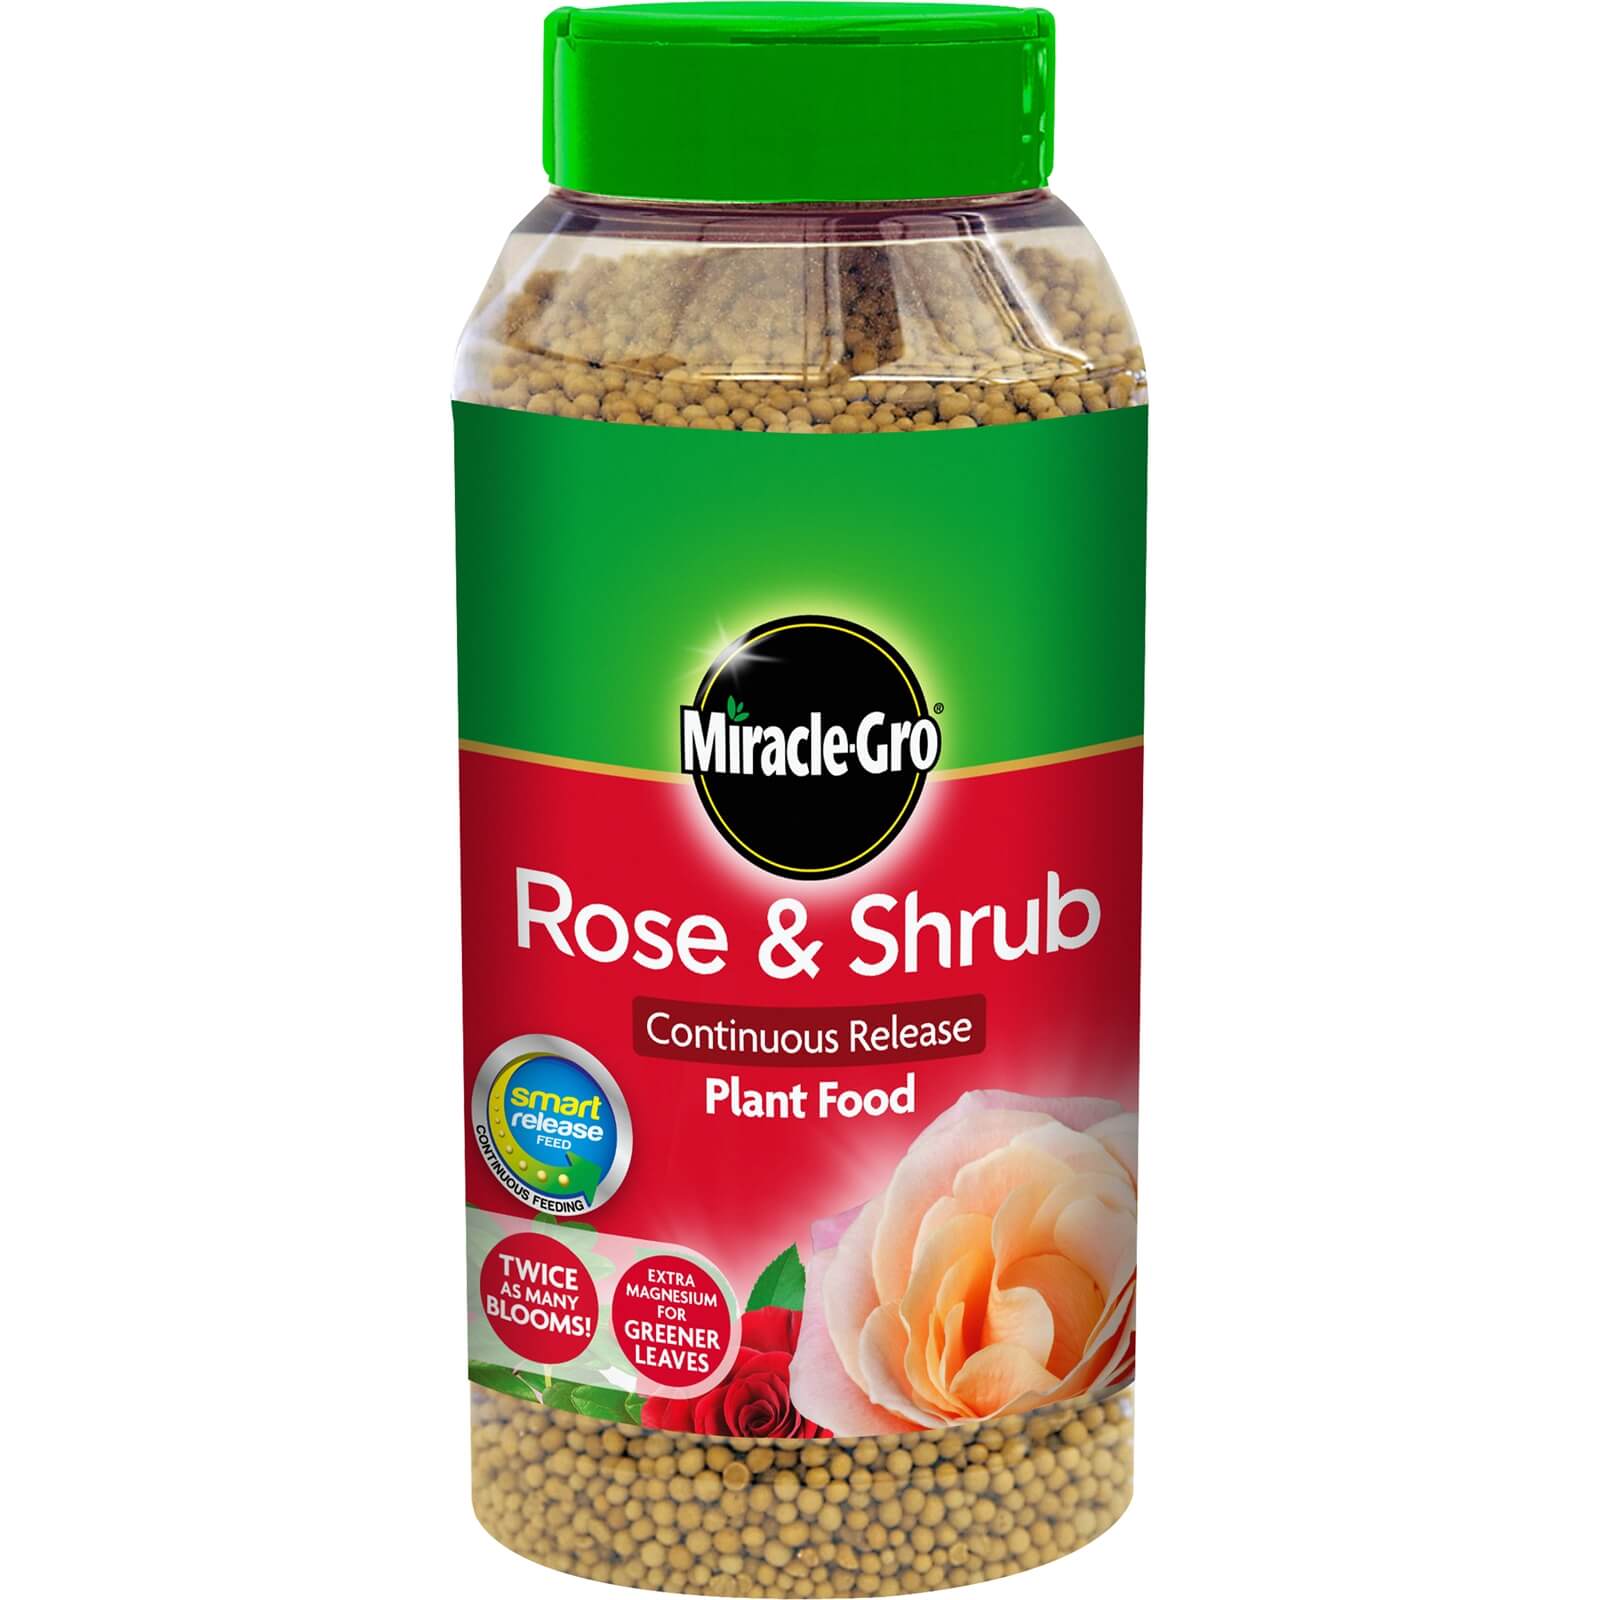 Miracle-Gro Rose & Shrub Continuous Release Plant Food - 1kg